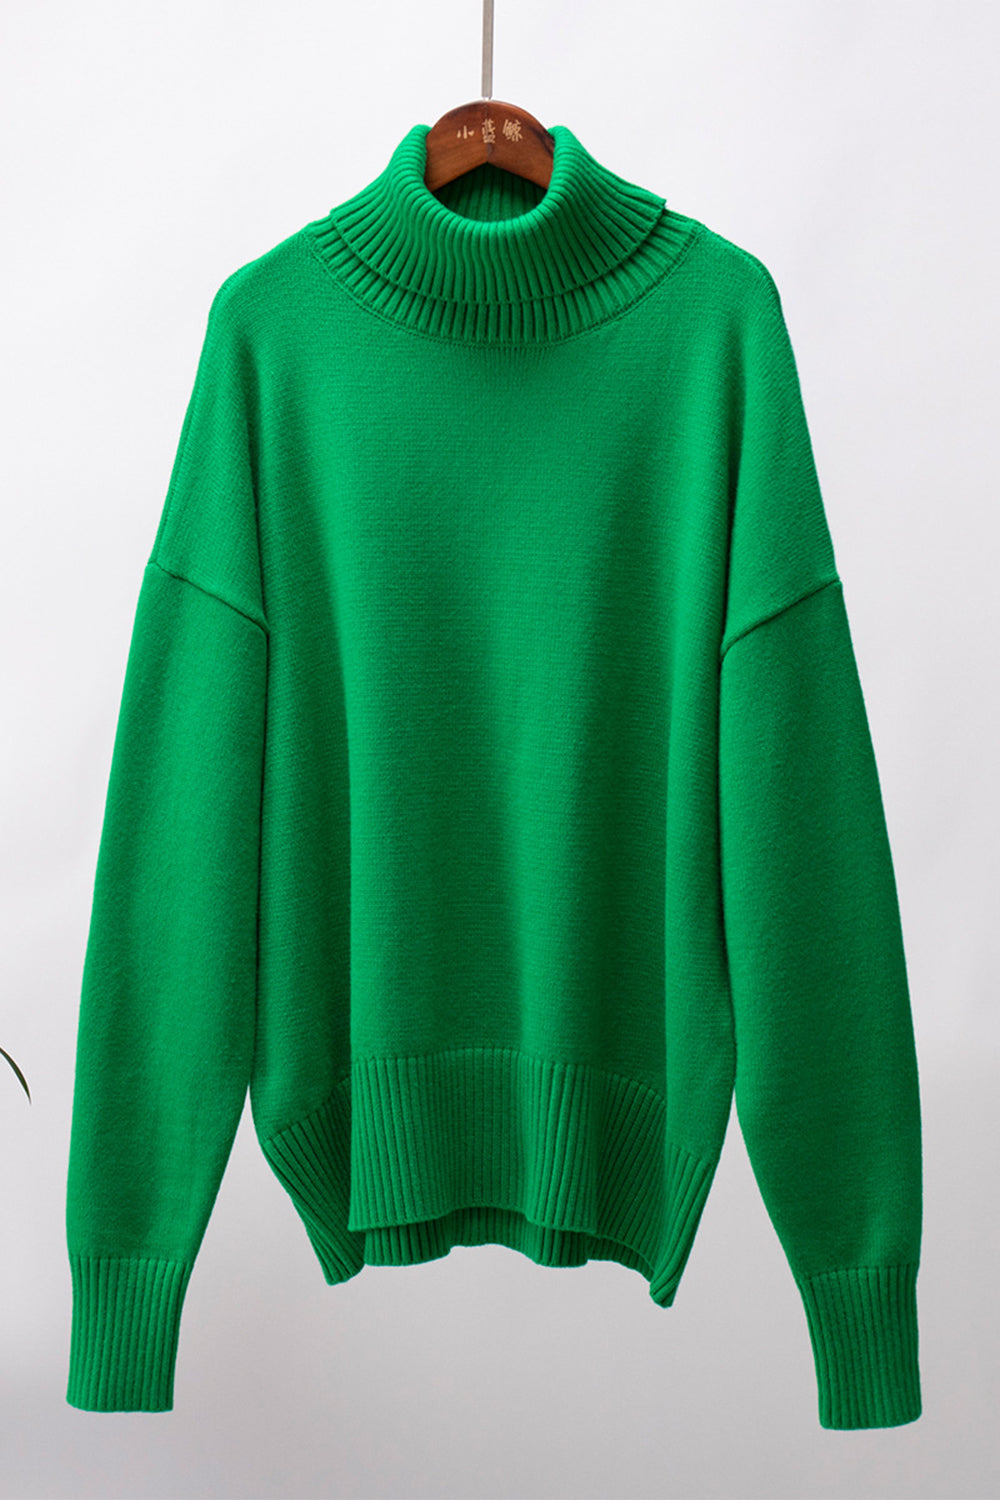 Turtle Neck Dropped Shoulder Sweater BLUE ZONE PLANET